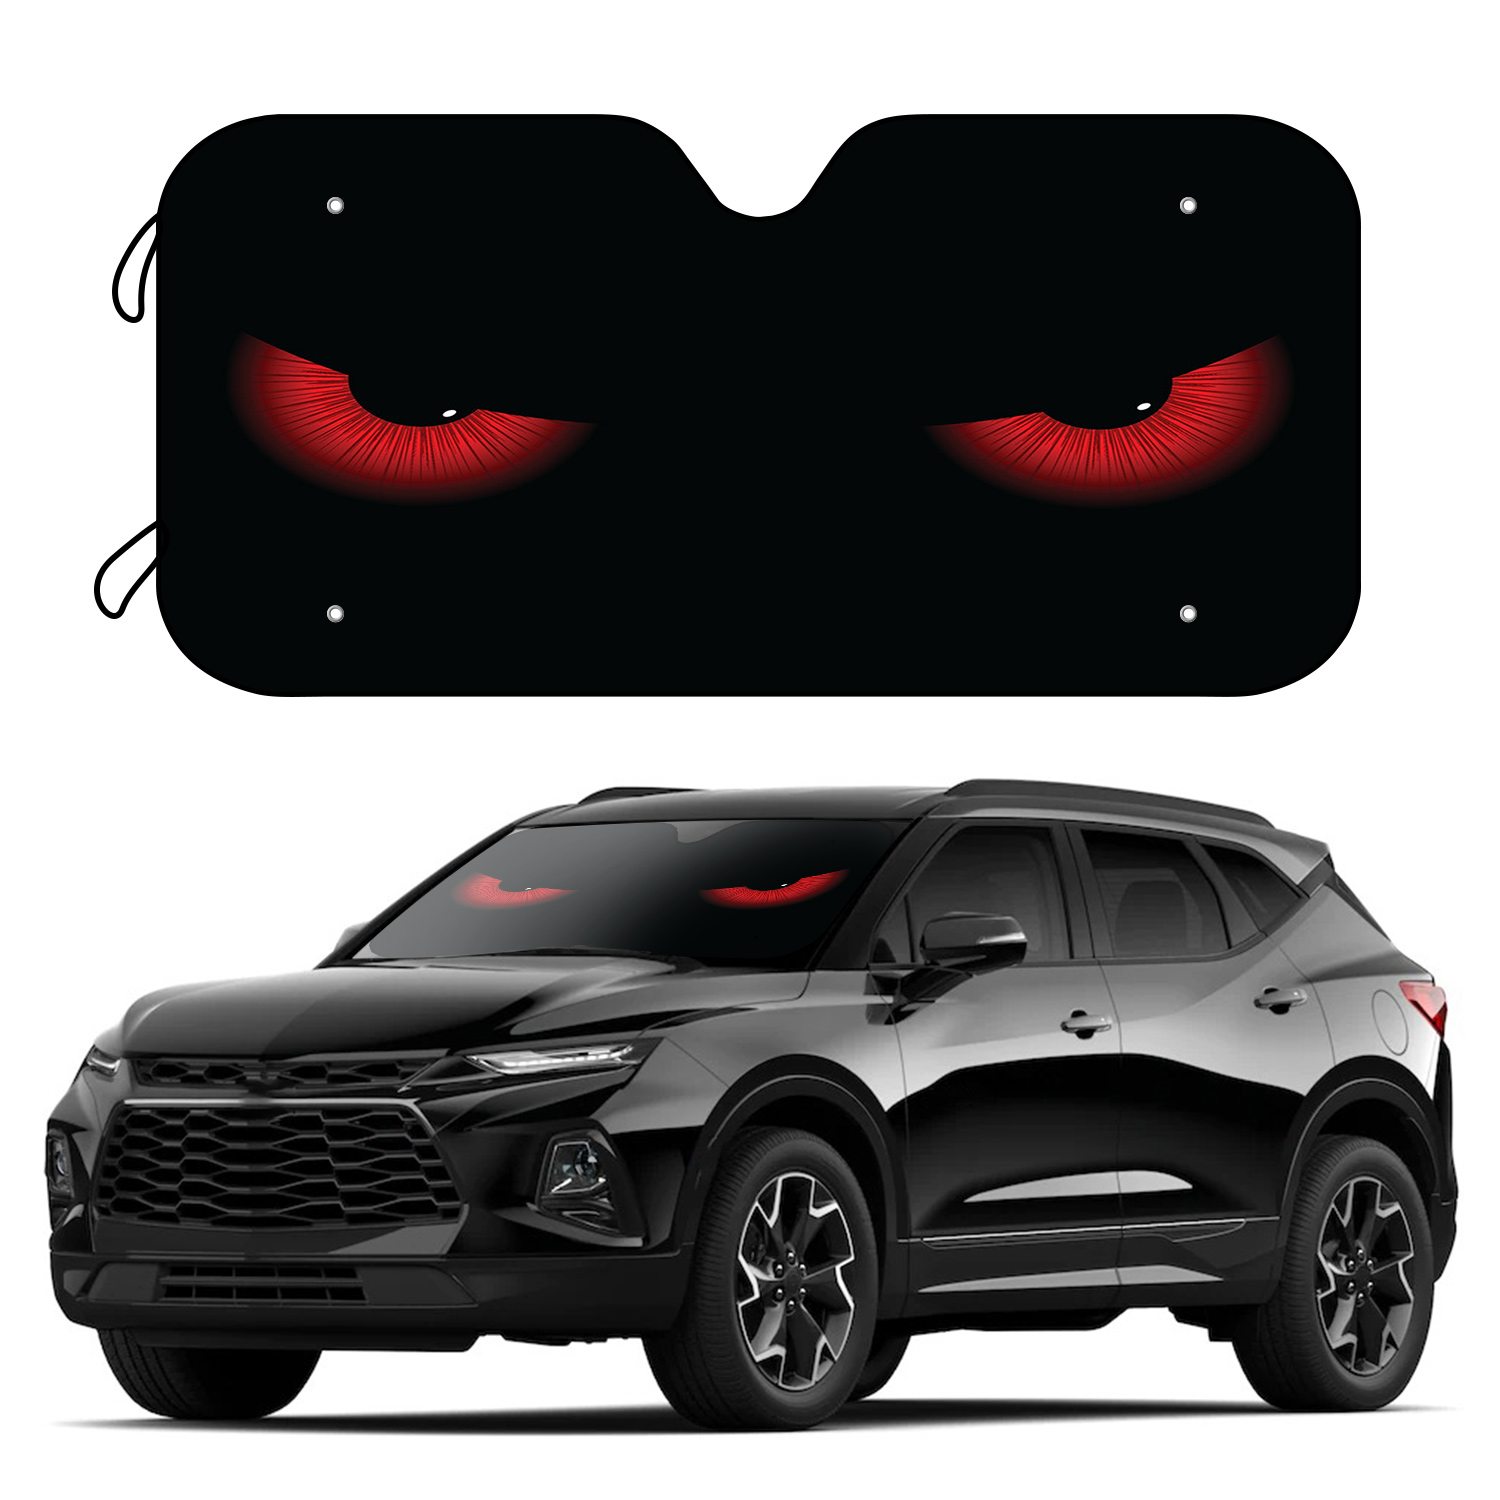 

1pc Red Eyes Car Sun Shade For Windshield Blocks Uv Rays Visor Protector Foldable Sun Shield With 4 Free Suction Cups Keeps Cool Beach Seaside Scenery